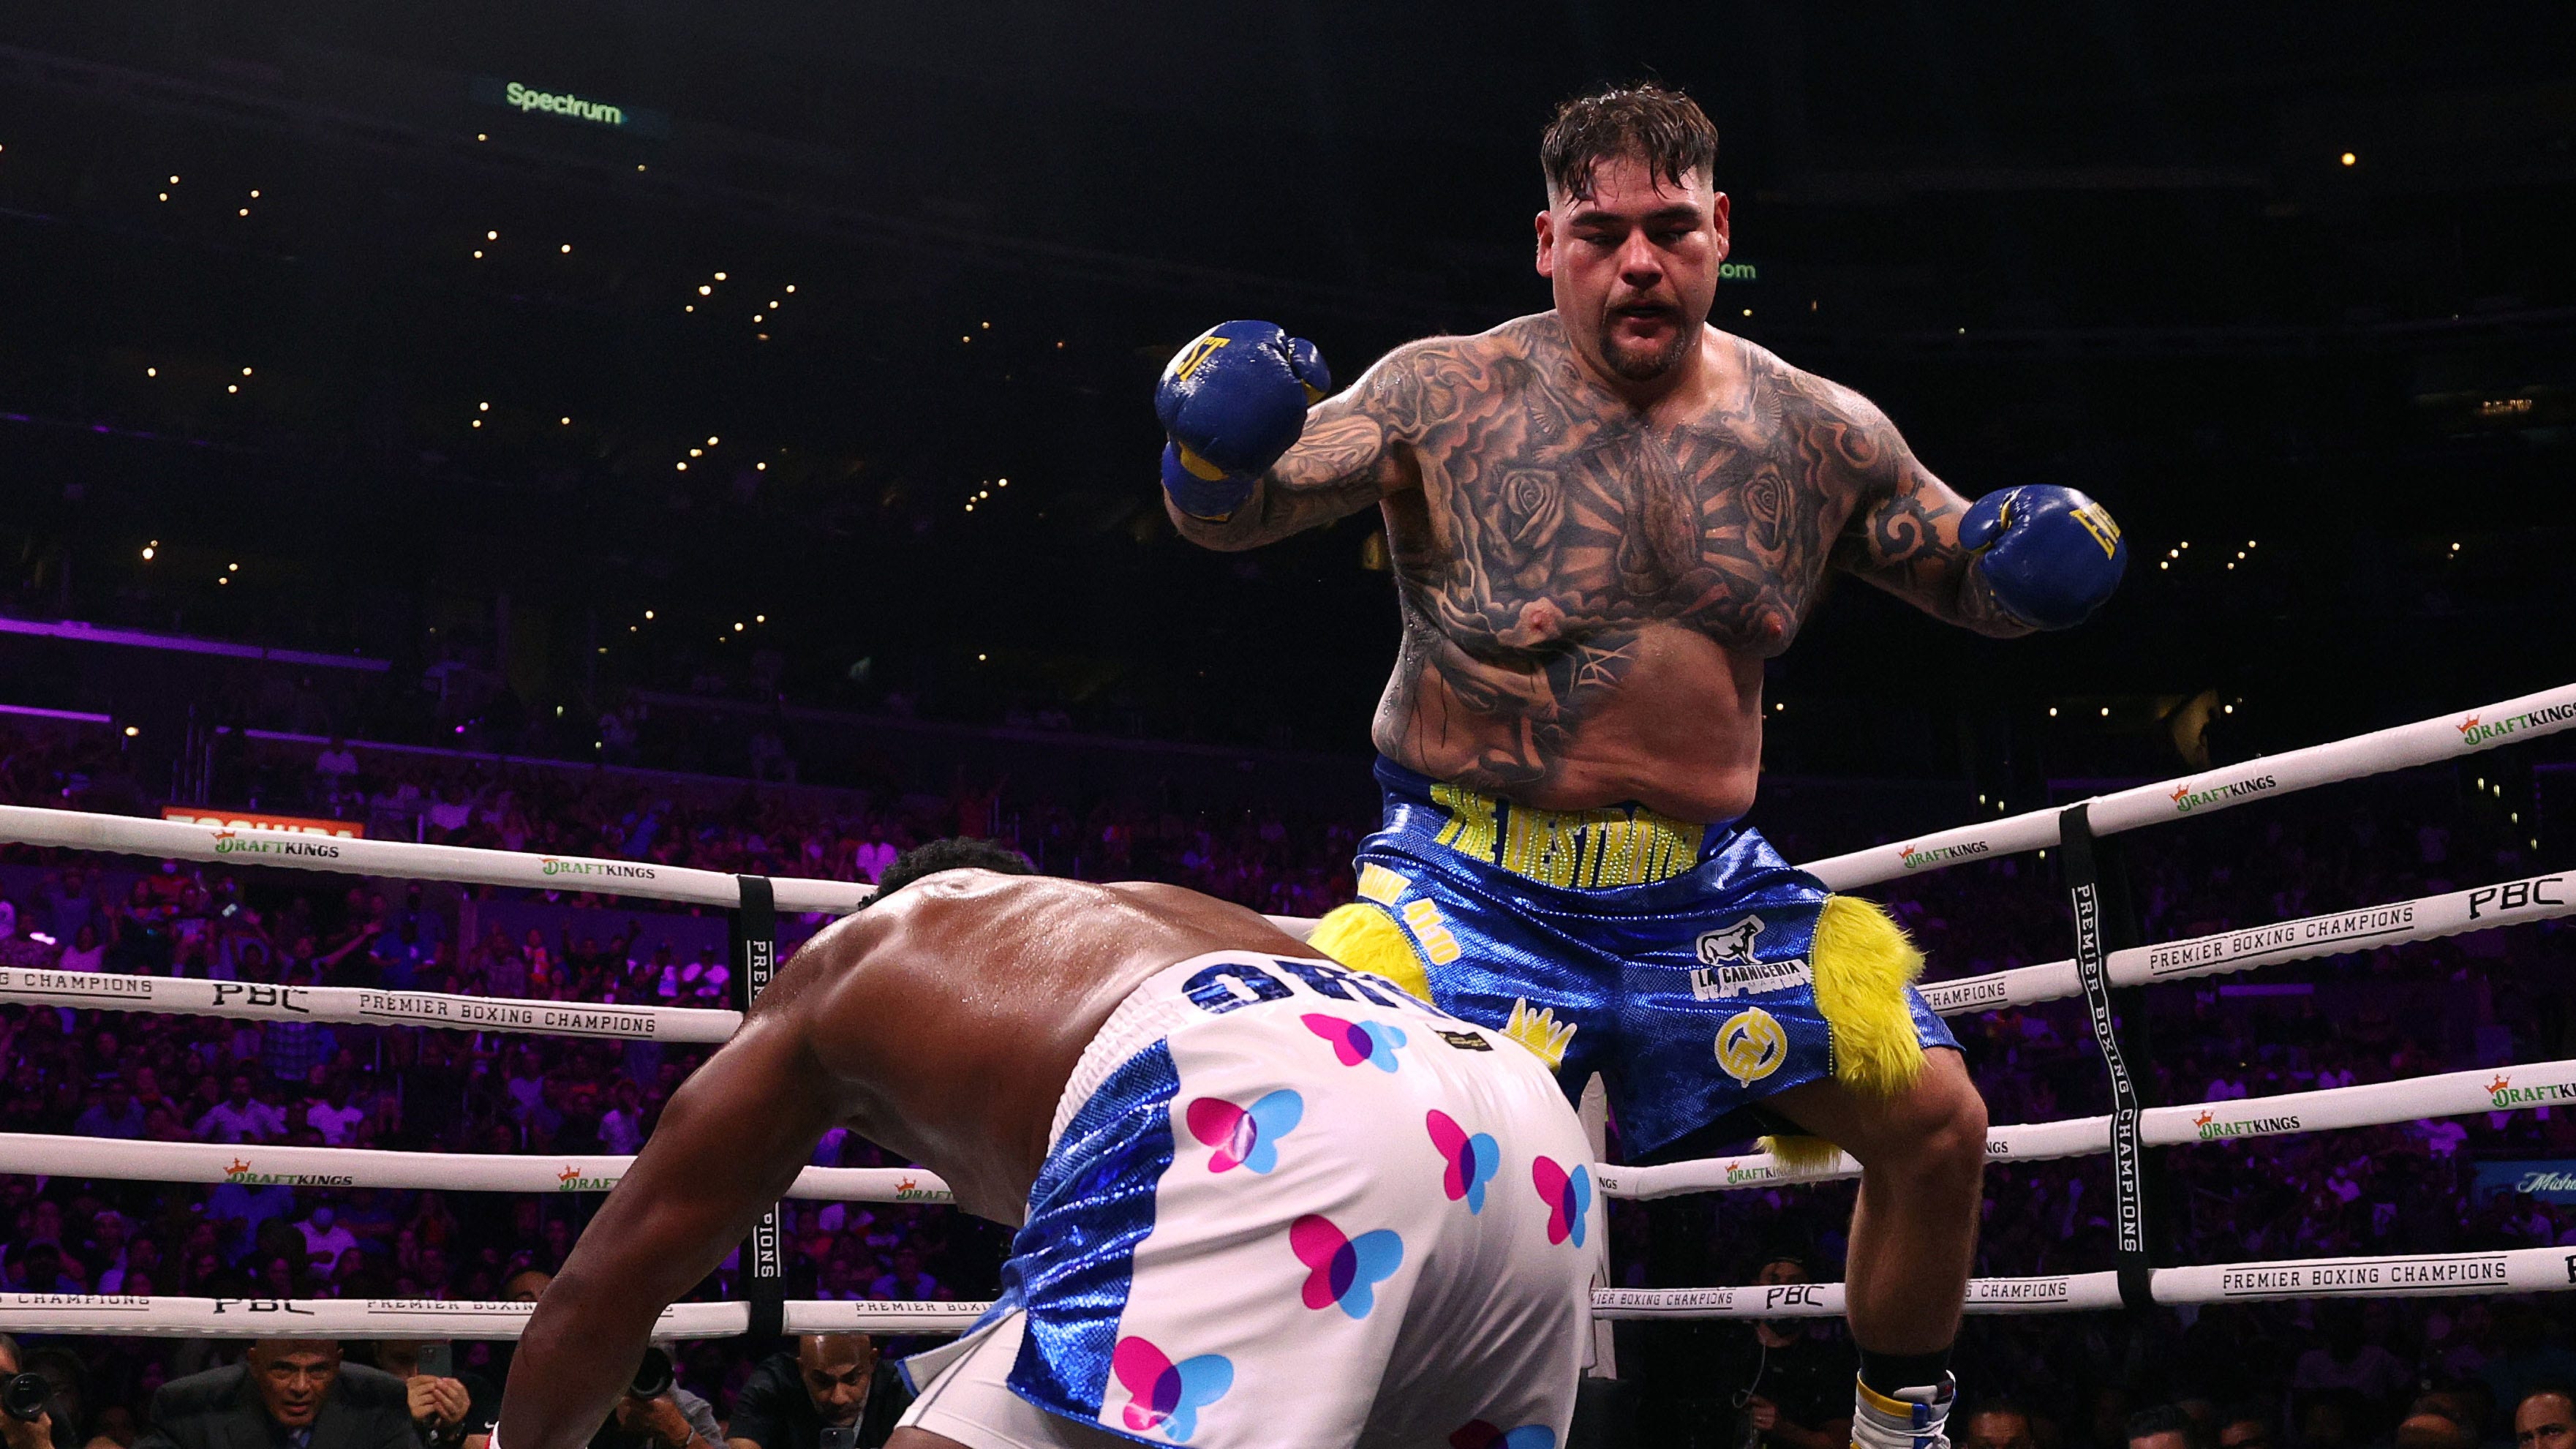 Andy Ruiz Jr. wins by unanimous decision over Luis Ortiz, owns heavyweight belt again